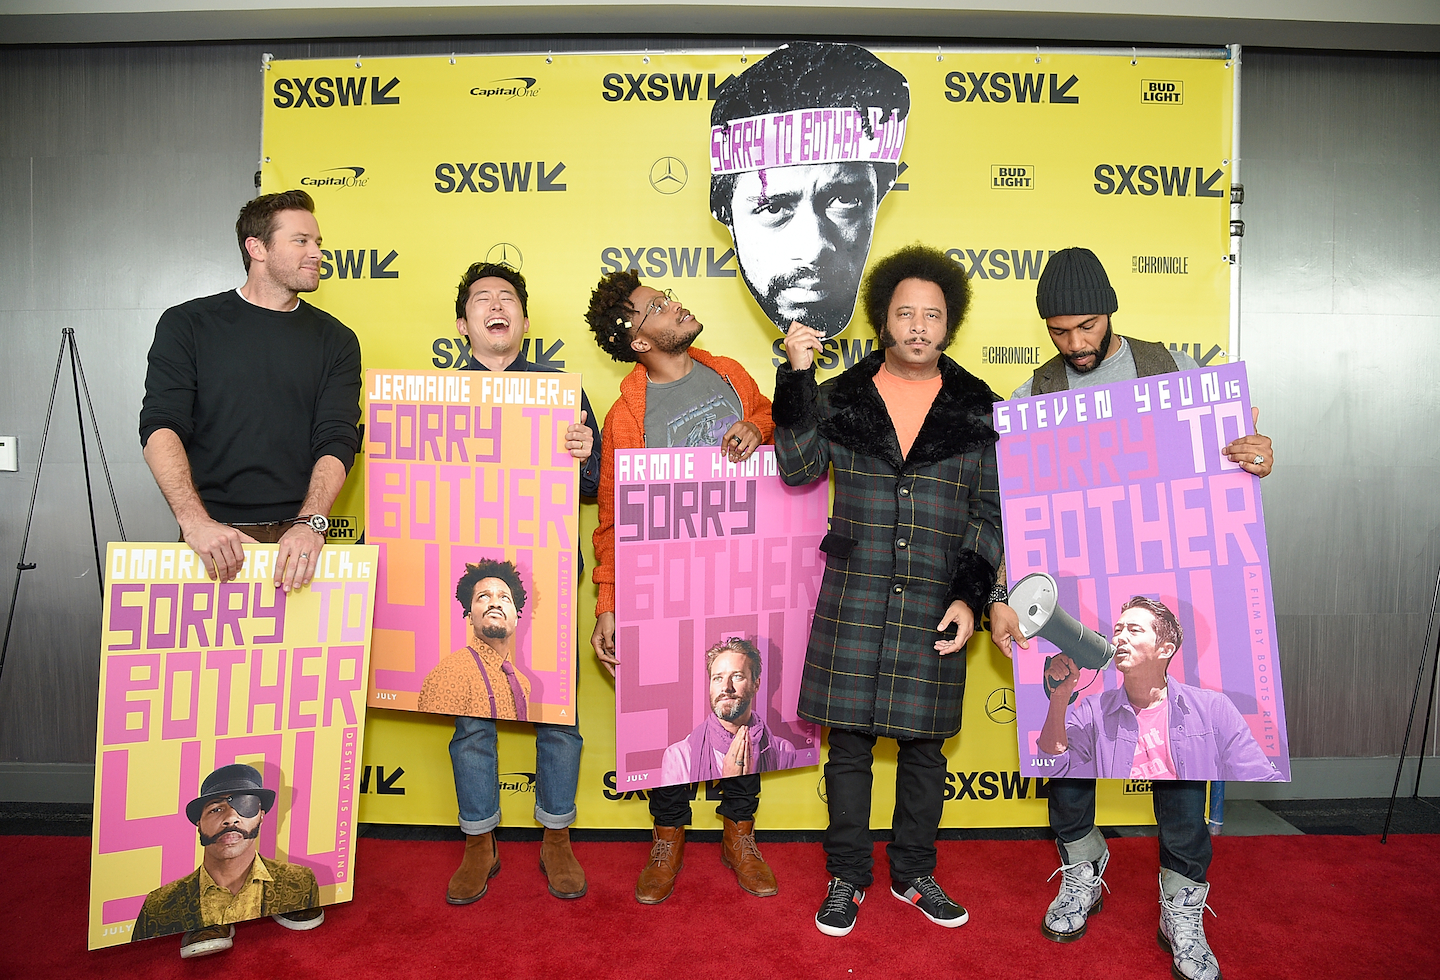 (L-R) Armie Hammer, Steven Yeun, Jermaine Fowler, Boots Riley, and Omari Hardwick at the Sorry to Bother You Premiere. Photo by Michael Loccisano/Getty Images for SXSW